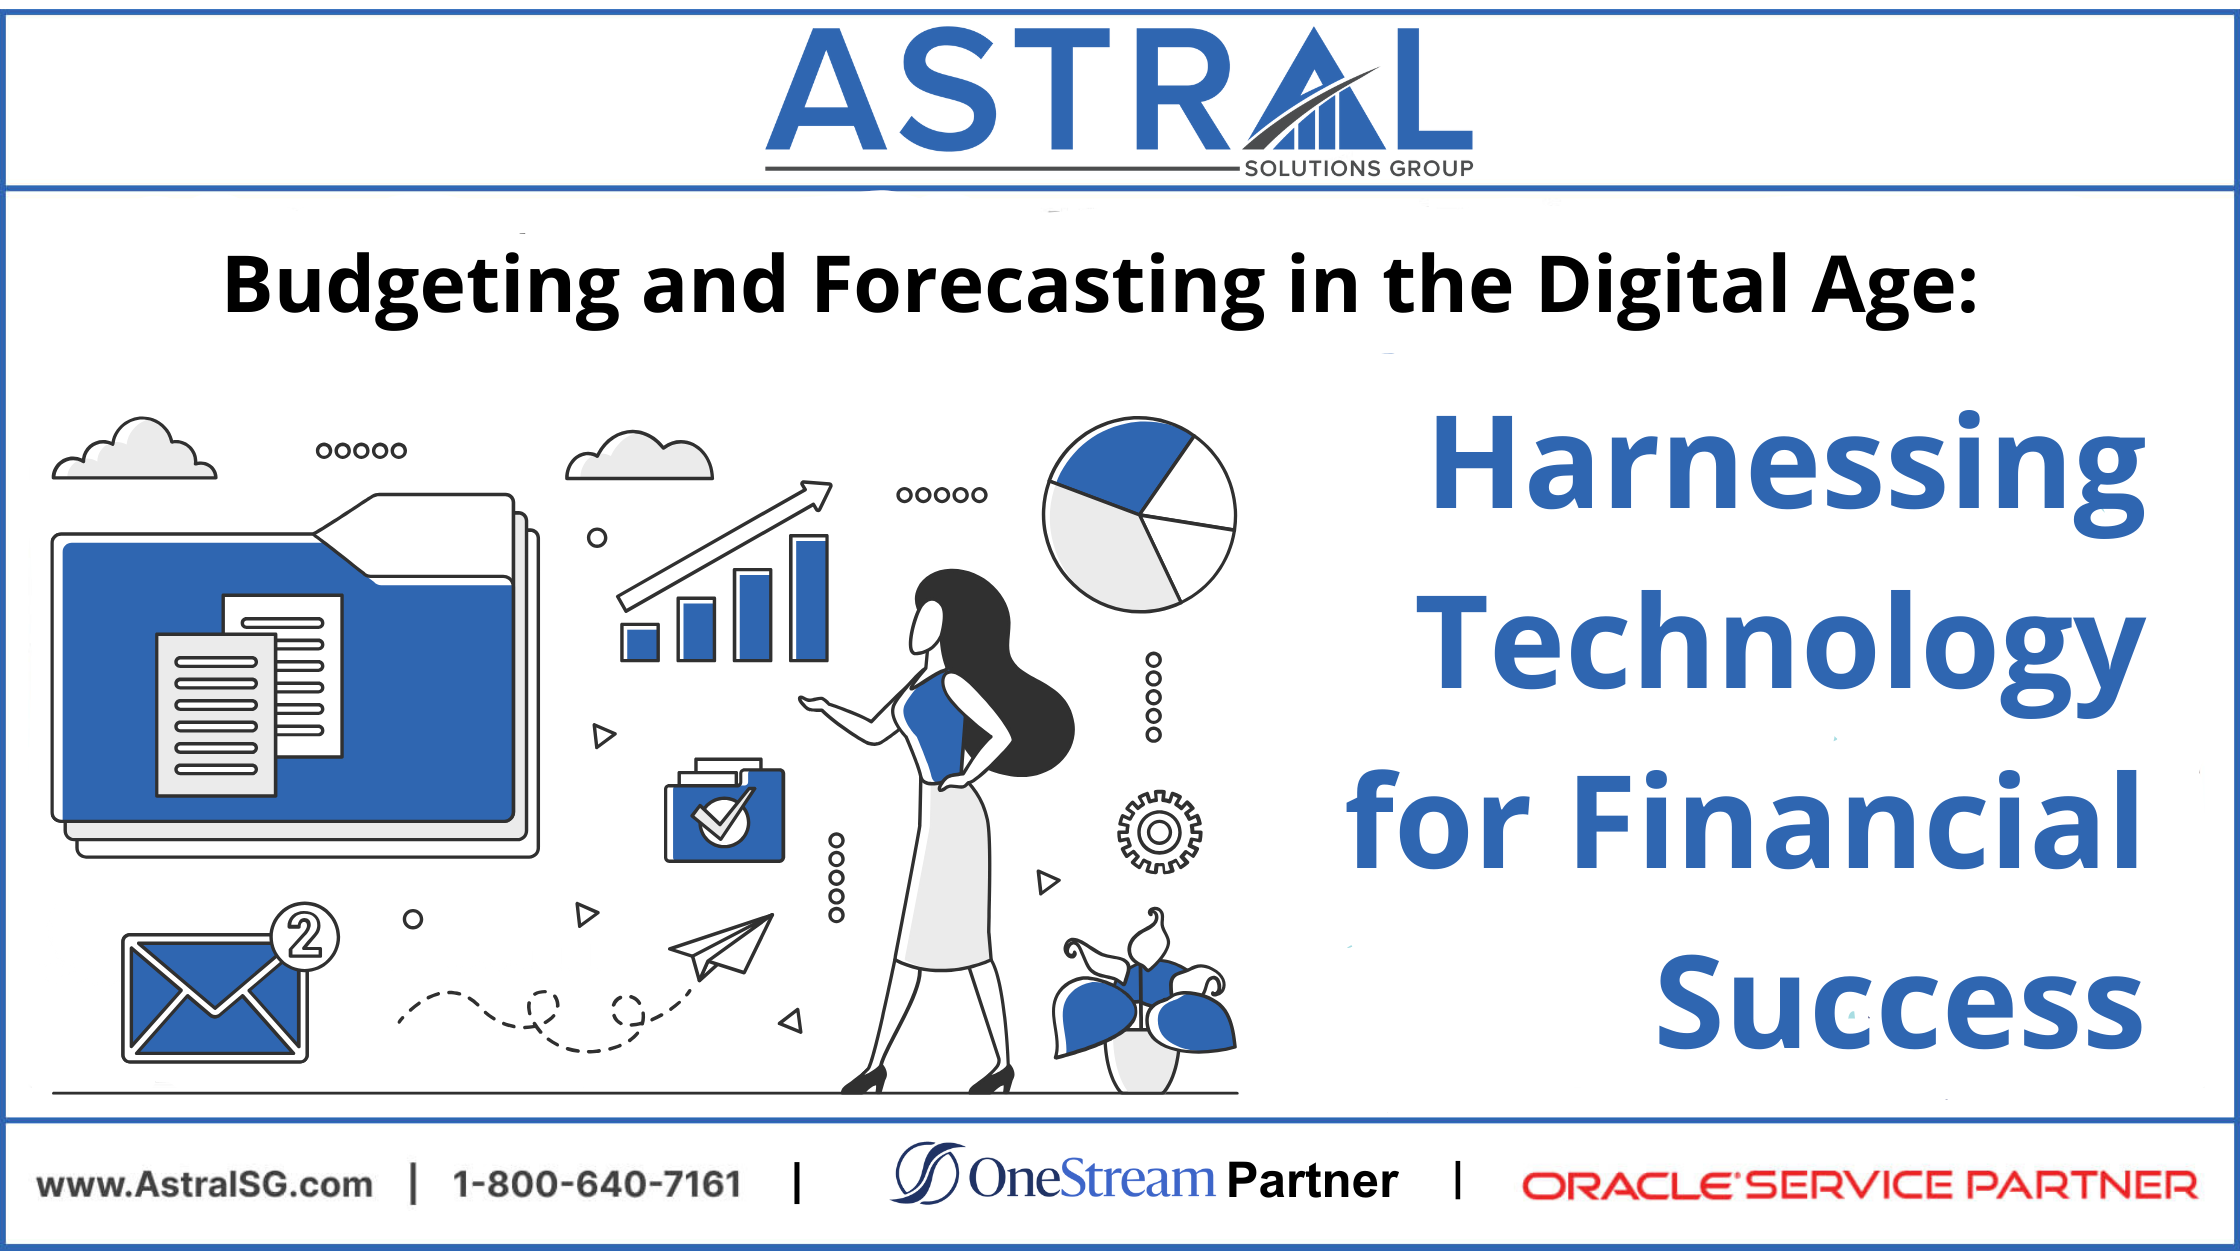 Budgeting and Forecasting in the Digital Age: Harnessing Technology for Financial Success